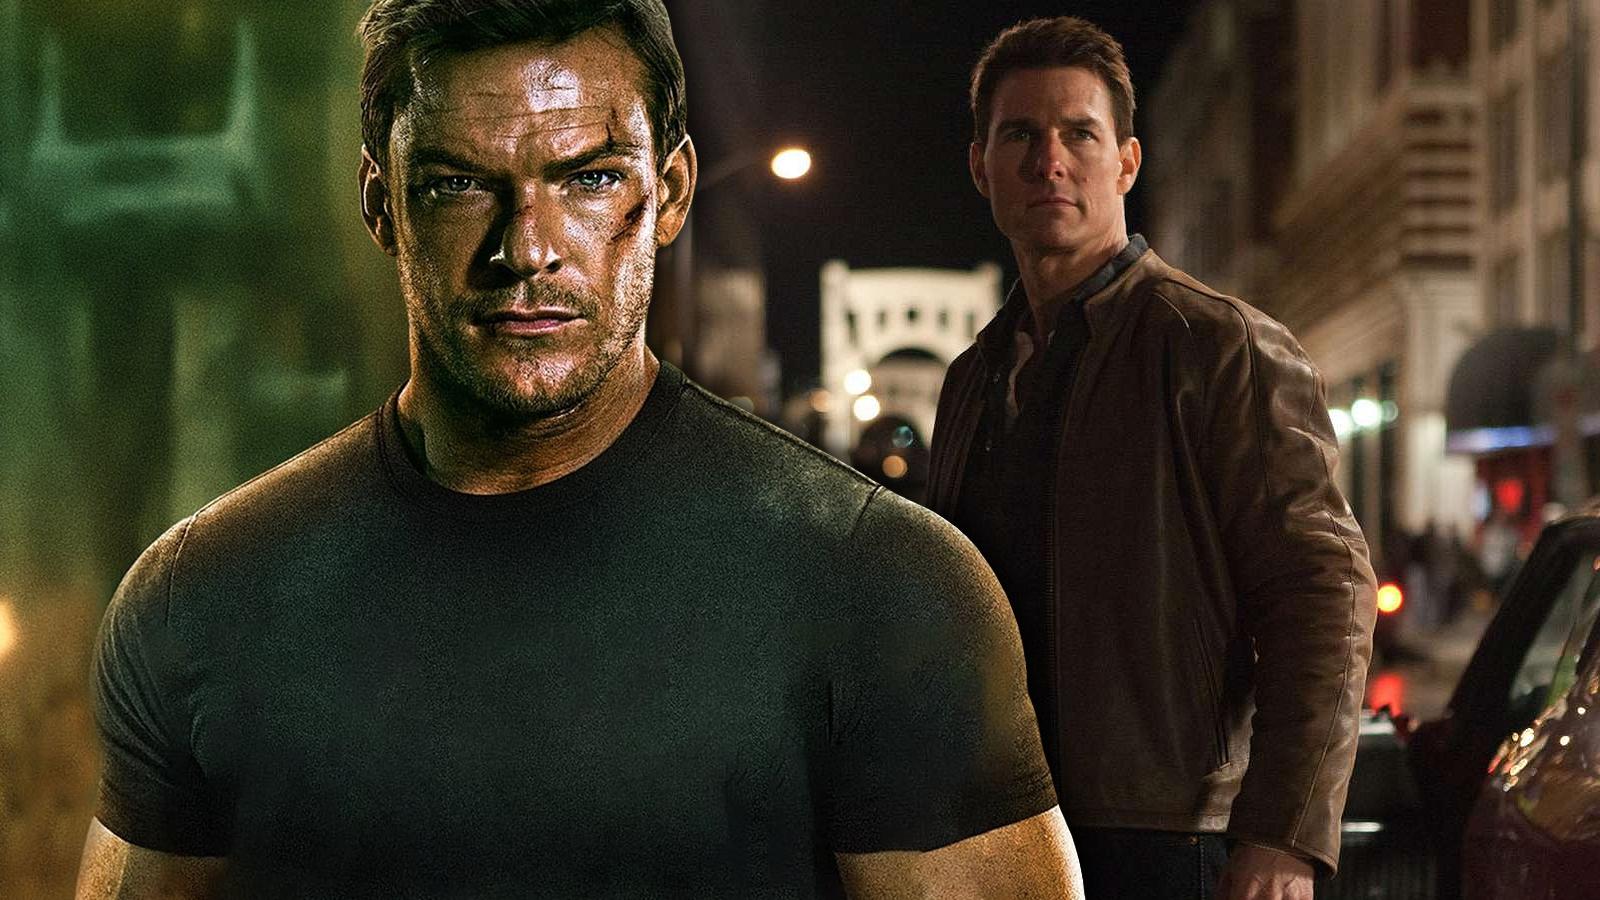 Alan Ritchson and Tom Cruise as Jack Reacher